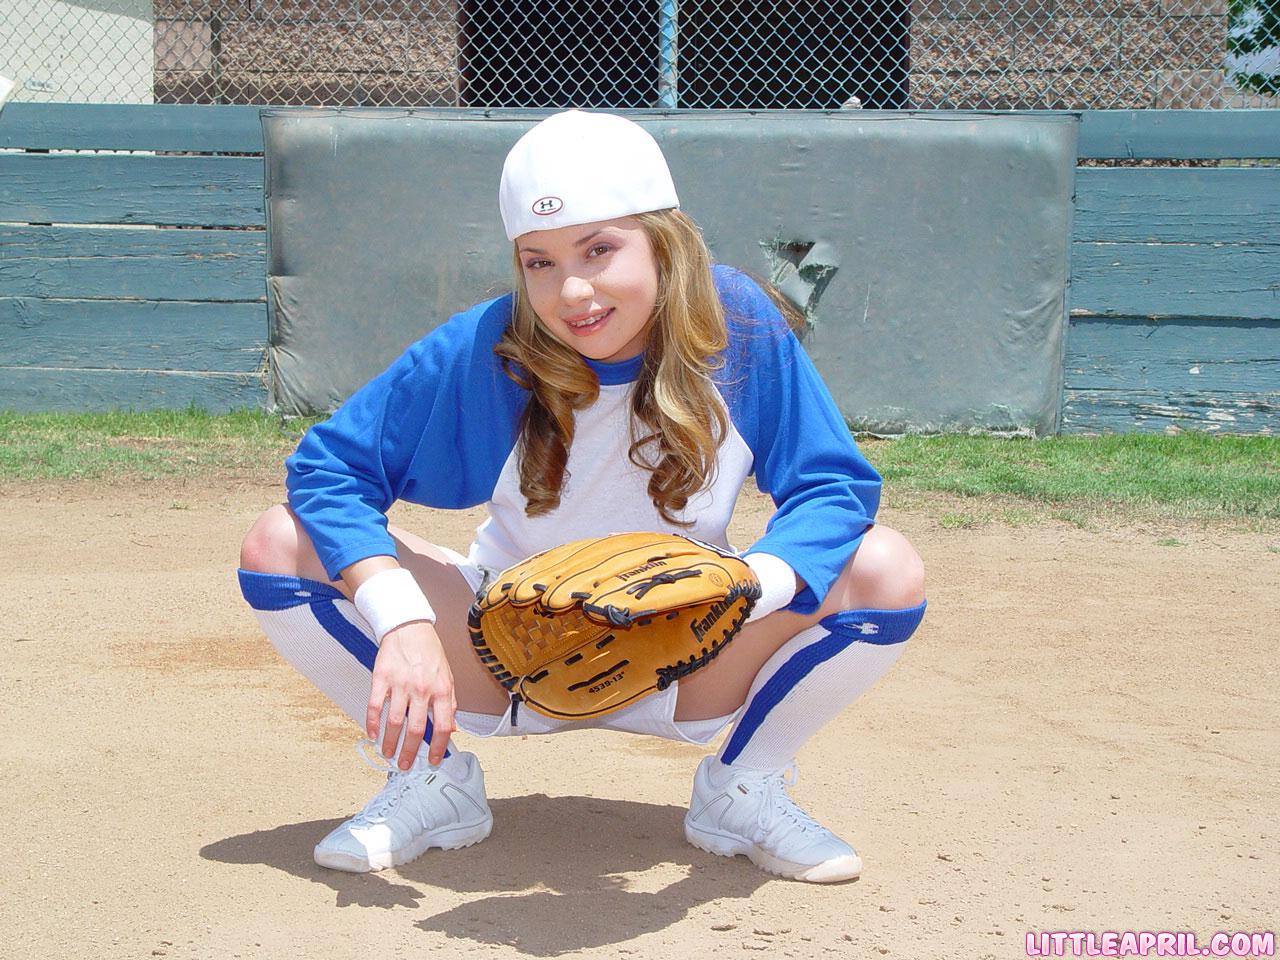 Pictures of Little April masturbating after a game of baseball #58993465